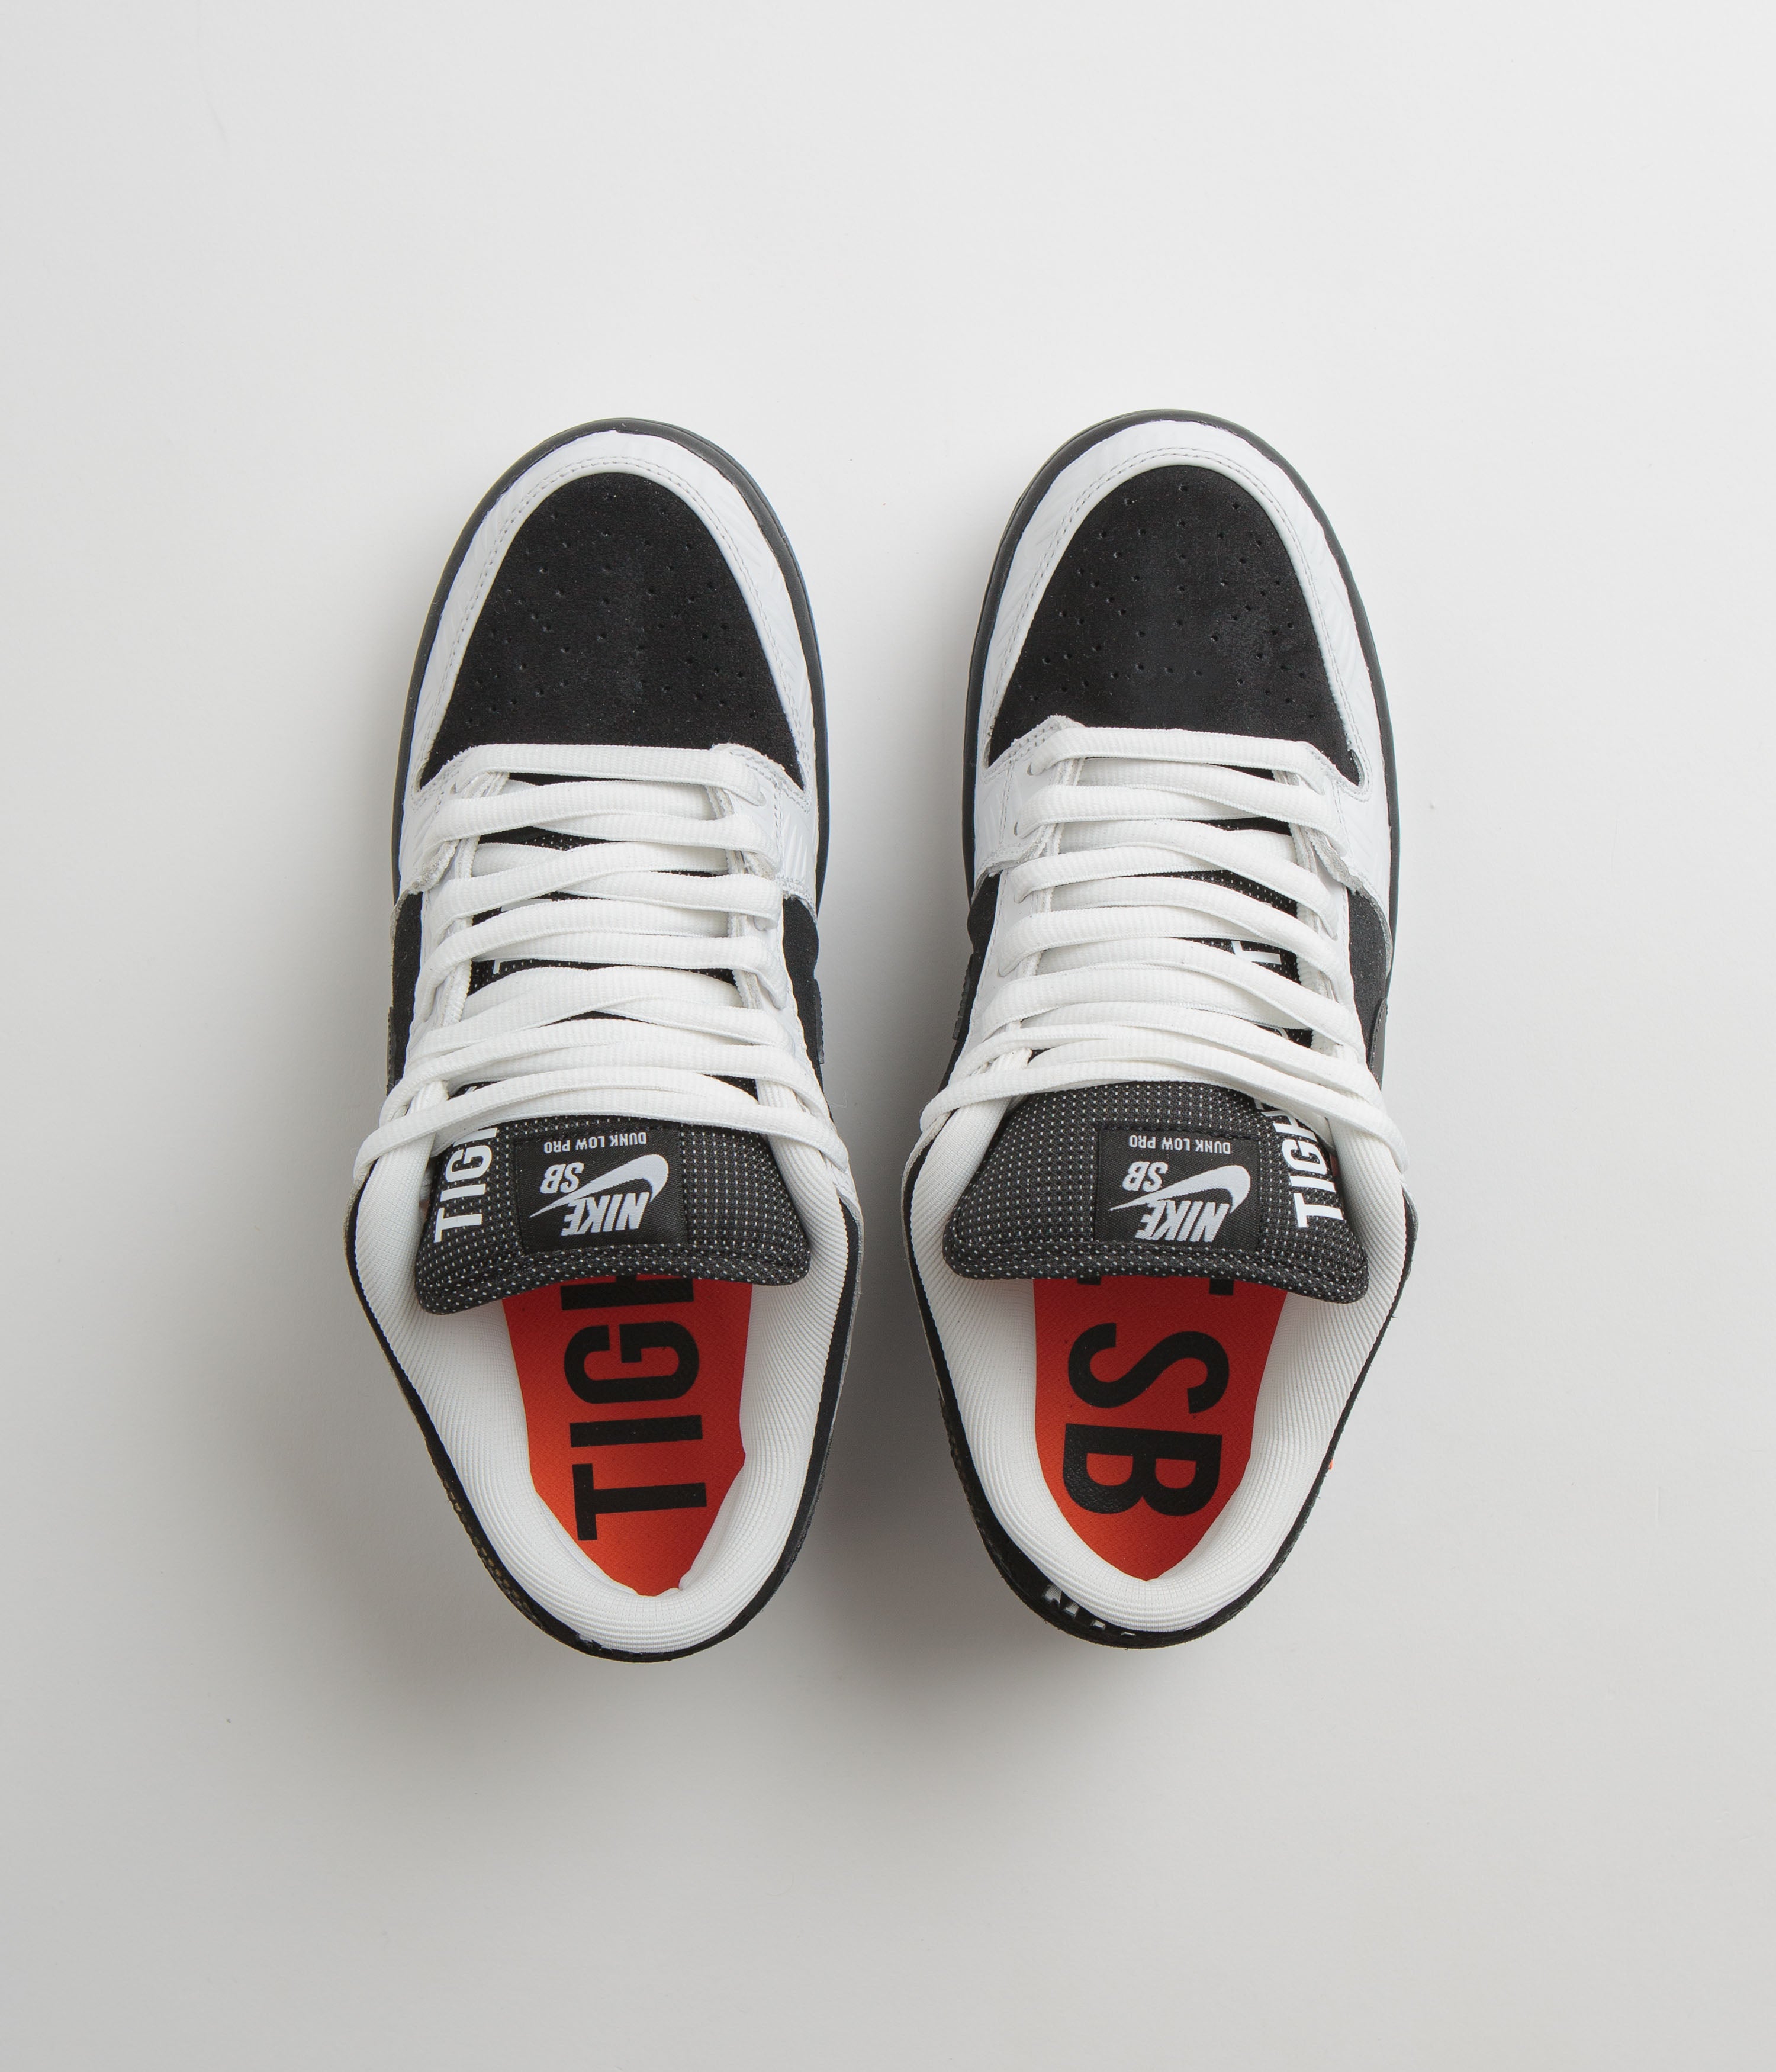 Nike SB x Tightbooth Dunk Low Pro Shoes - White / Black - Safety